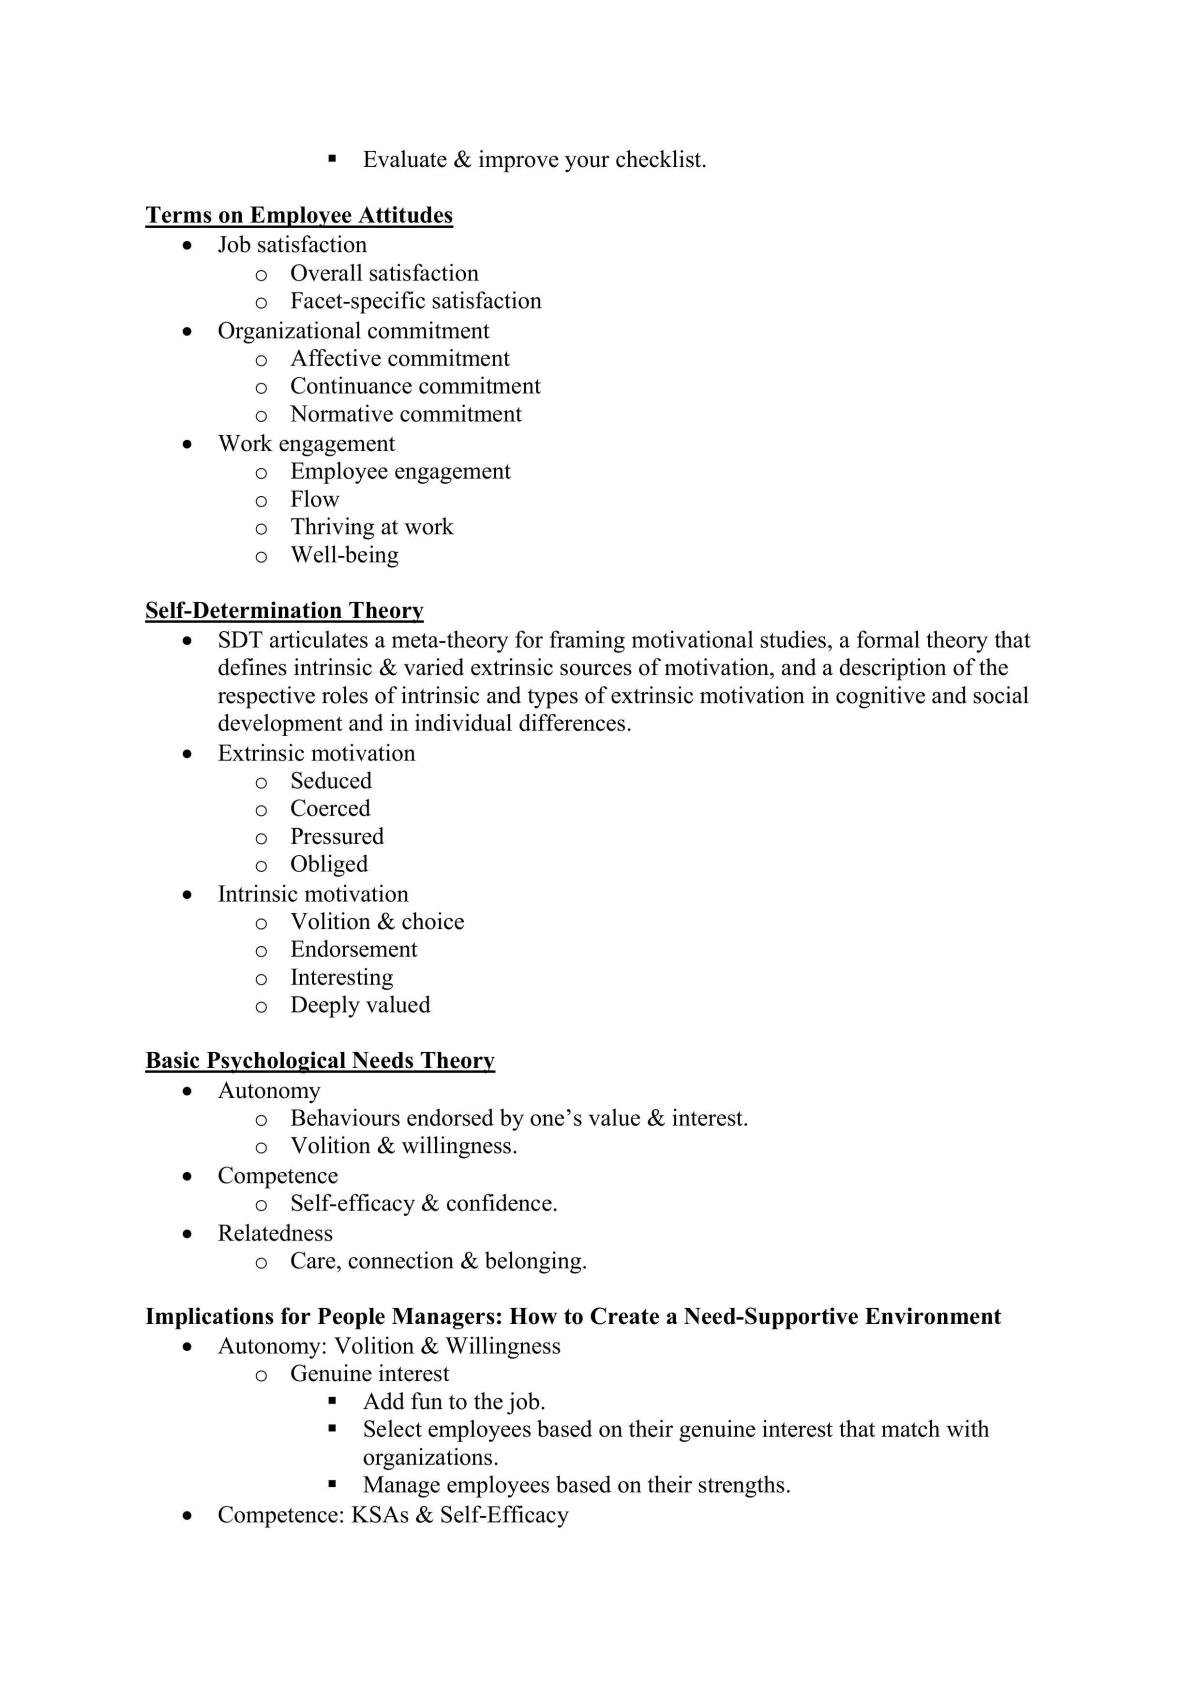 Human Resource Management notes - Page 17